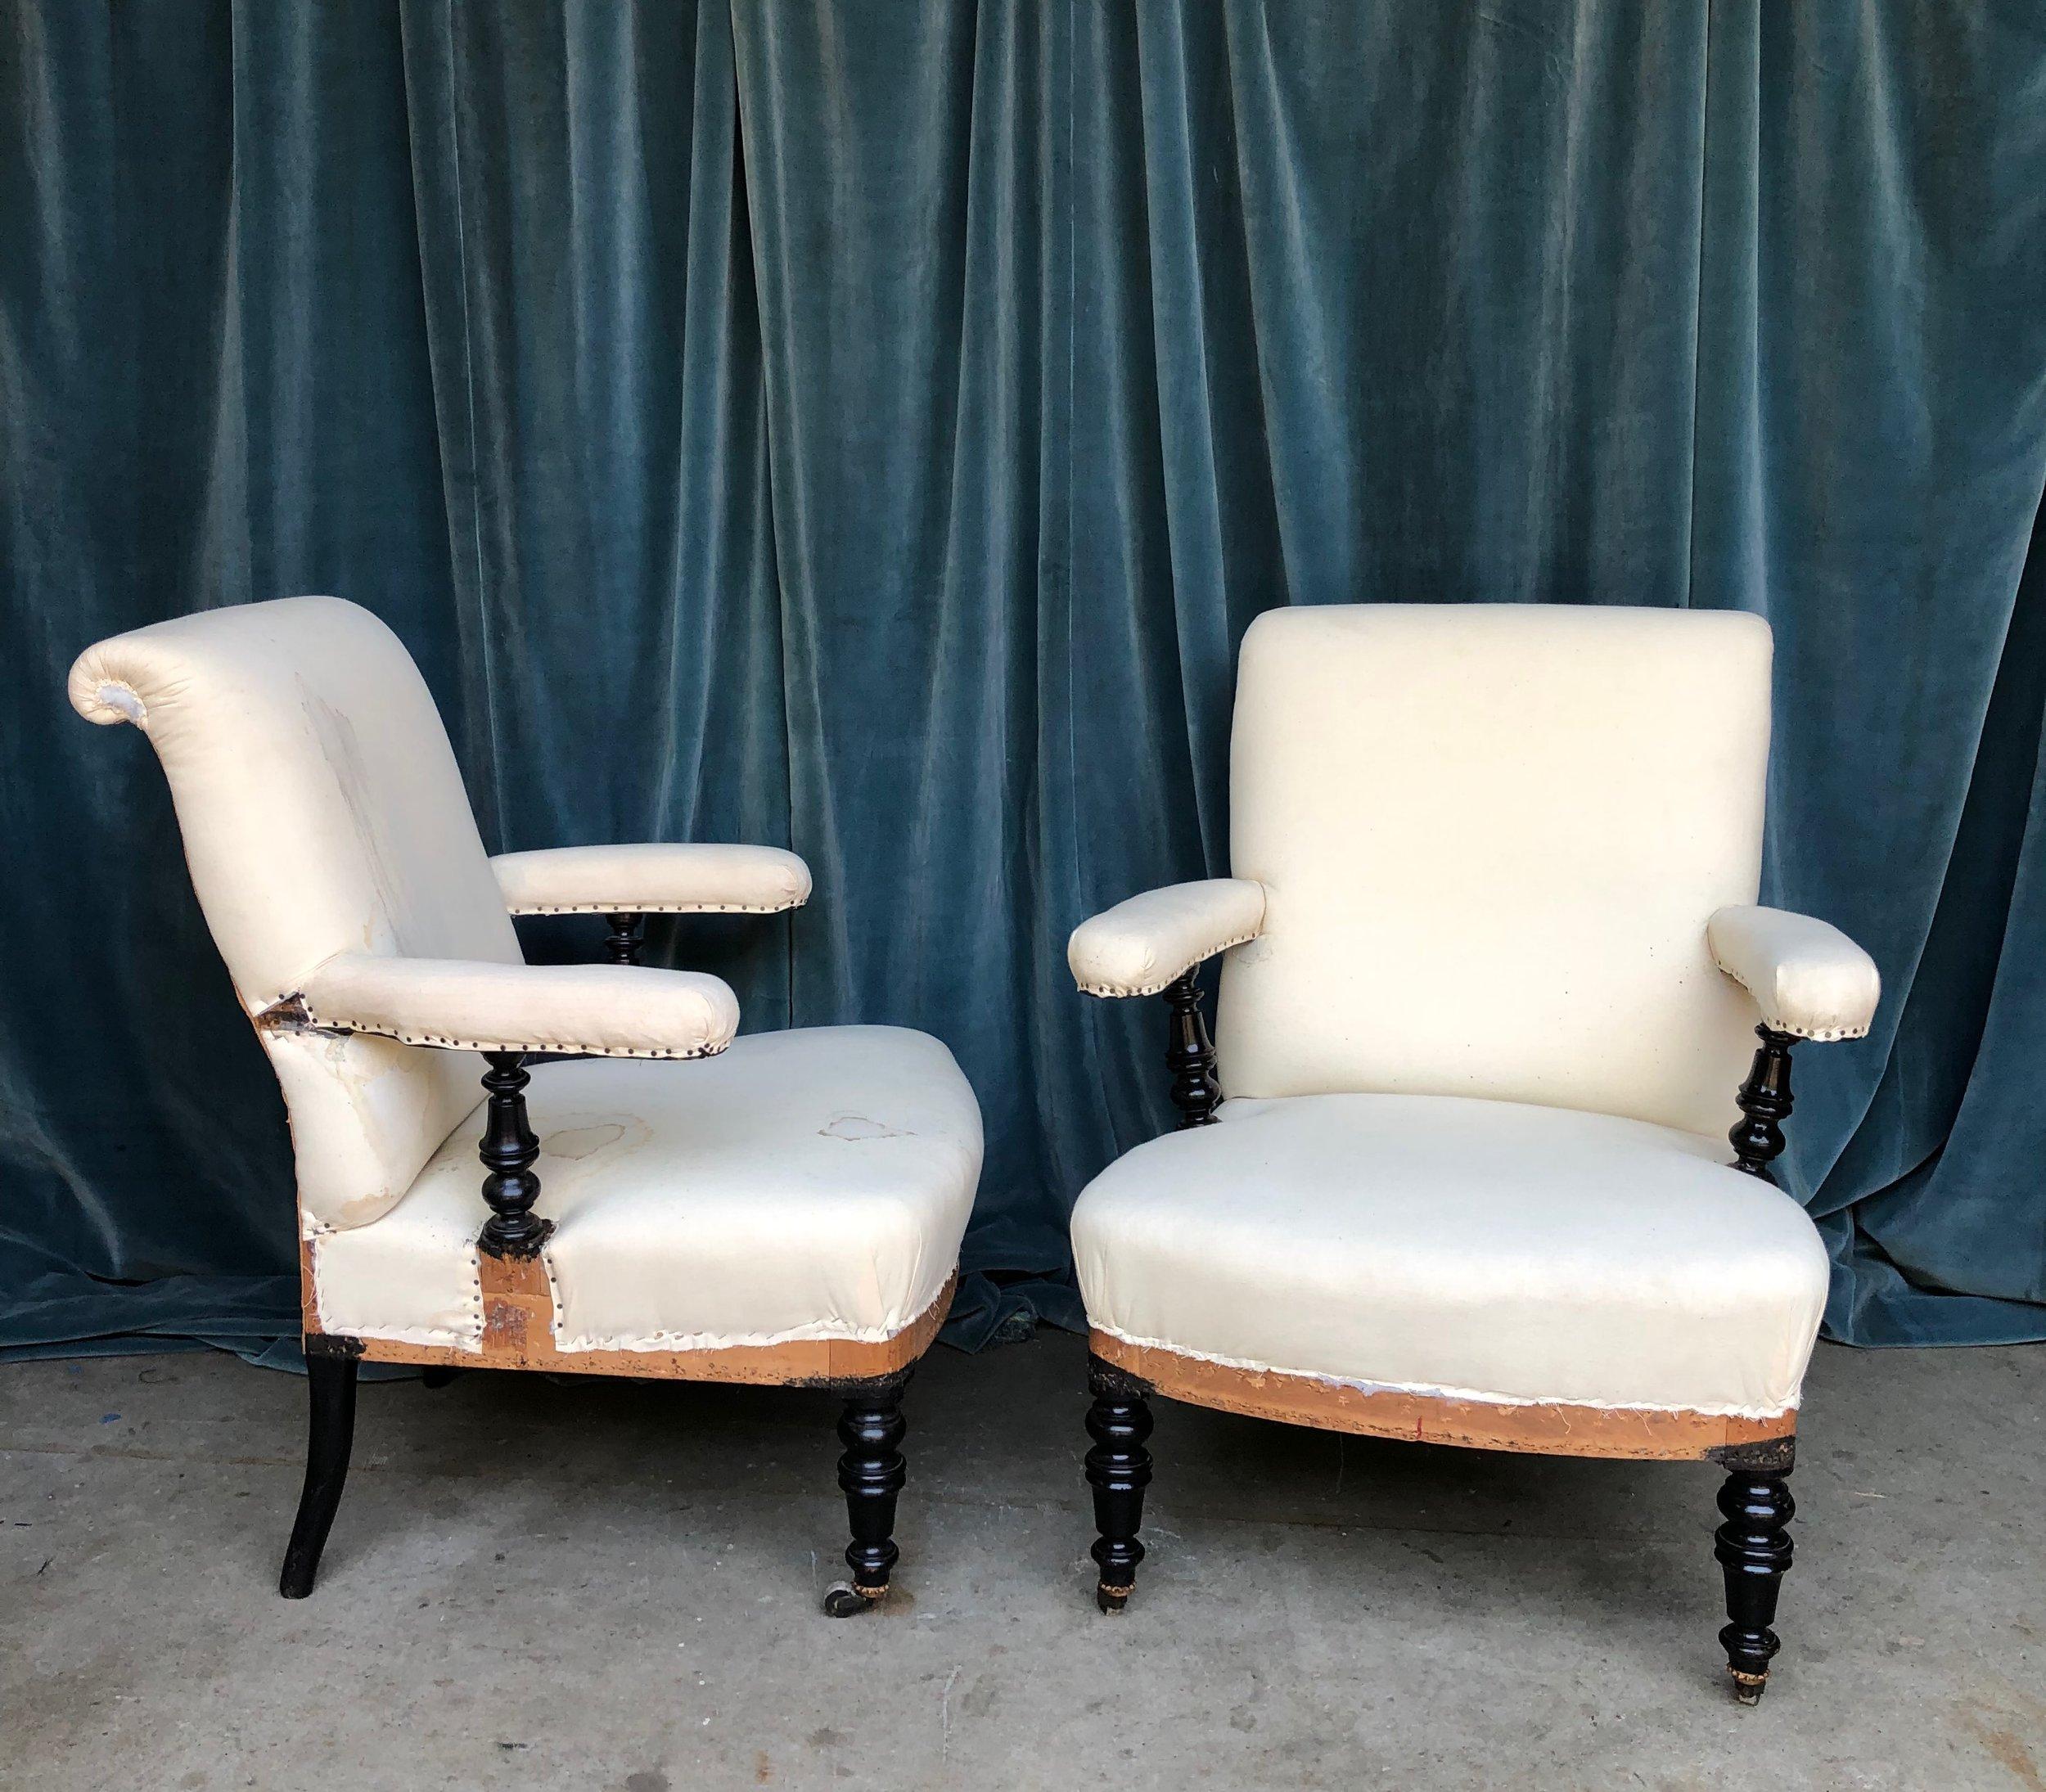 This handsome pair of 19th century French Napoleon III armchairs are unique and one of a kind. The chairs feature 'floating' arms that rest on turned ebonized supports, mirroring the turned legs characteristic of this period. Adding to their